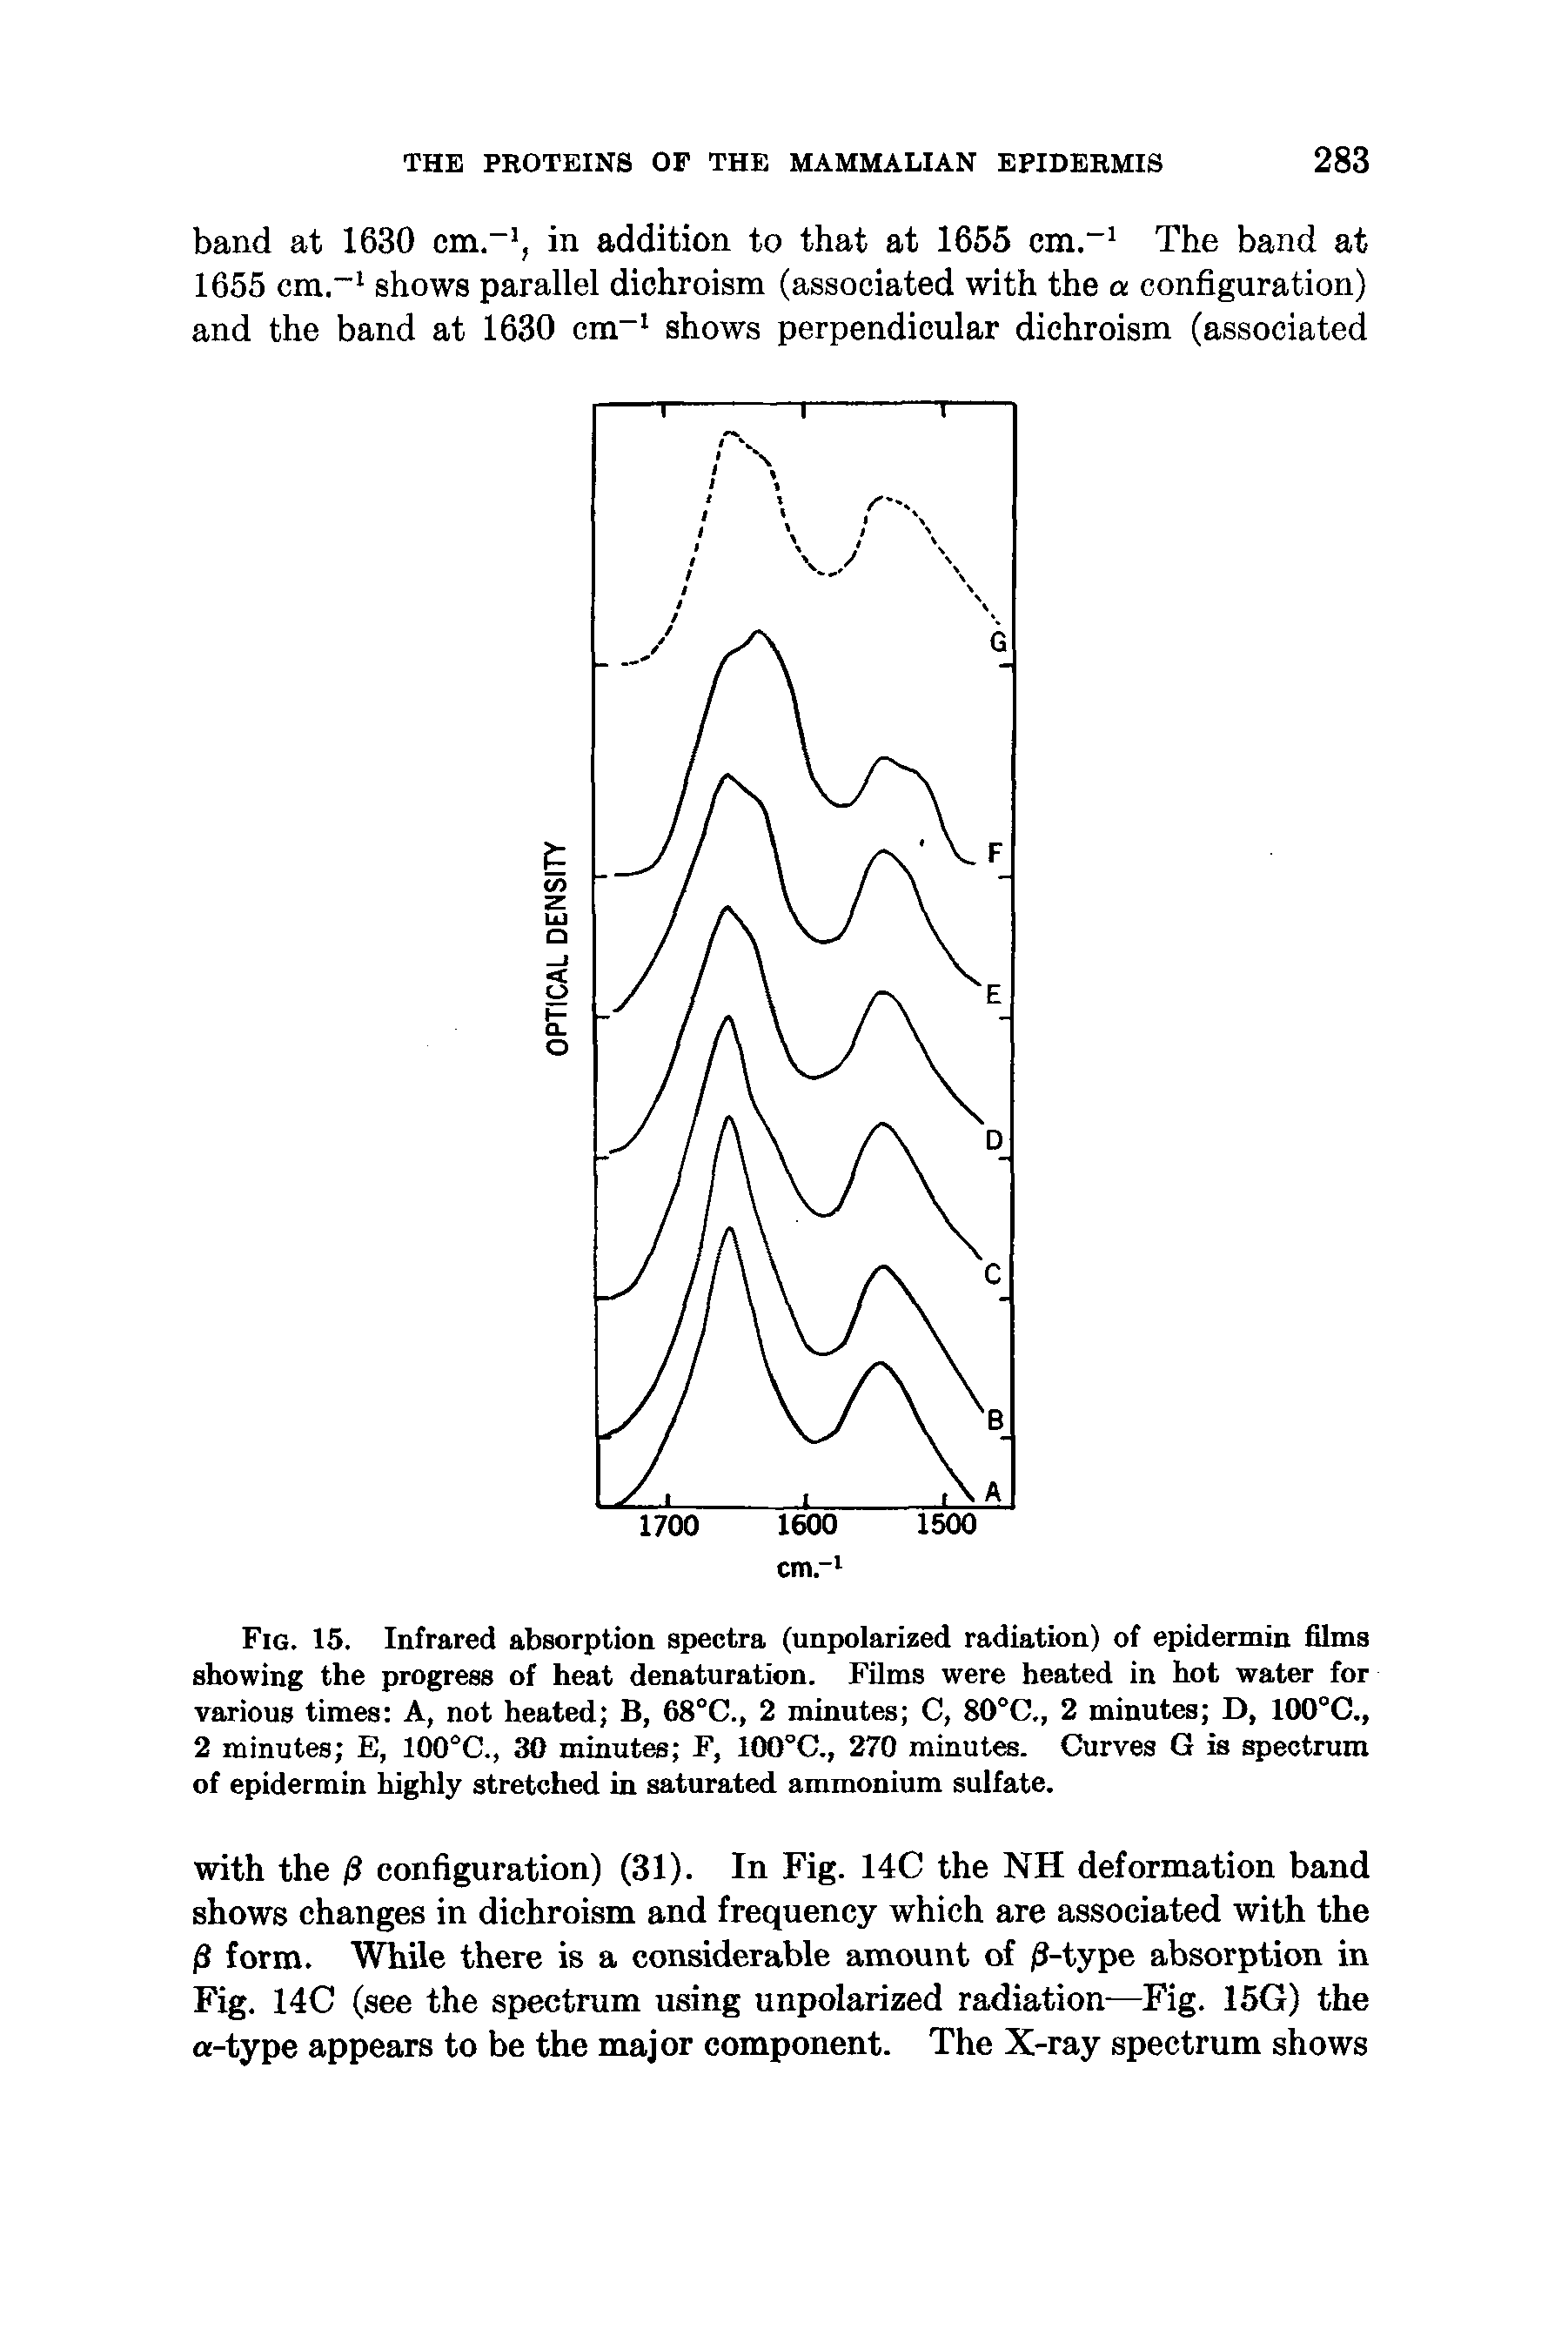 Fig. 15. Infrared absorption spectra (unpolarized radiation) of epidermin films showing the progress of heat denaturation. Films were heated in hot water for various times A, not heated B, 68°C., 2 minutes C, 80°C., 2 minutes D, 100°C., 2 minutes E, 100°C., 30 minutes F, 100°C., 270 minute. Curves G is spectrum of epidermin highly stretched in saturated ammonium sulfate.